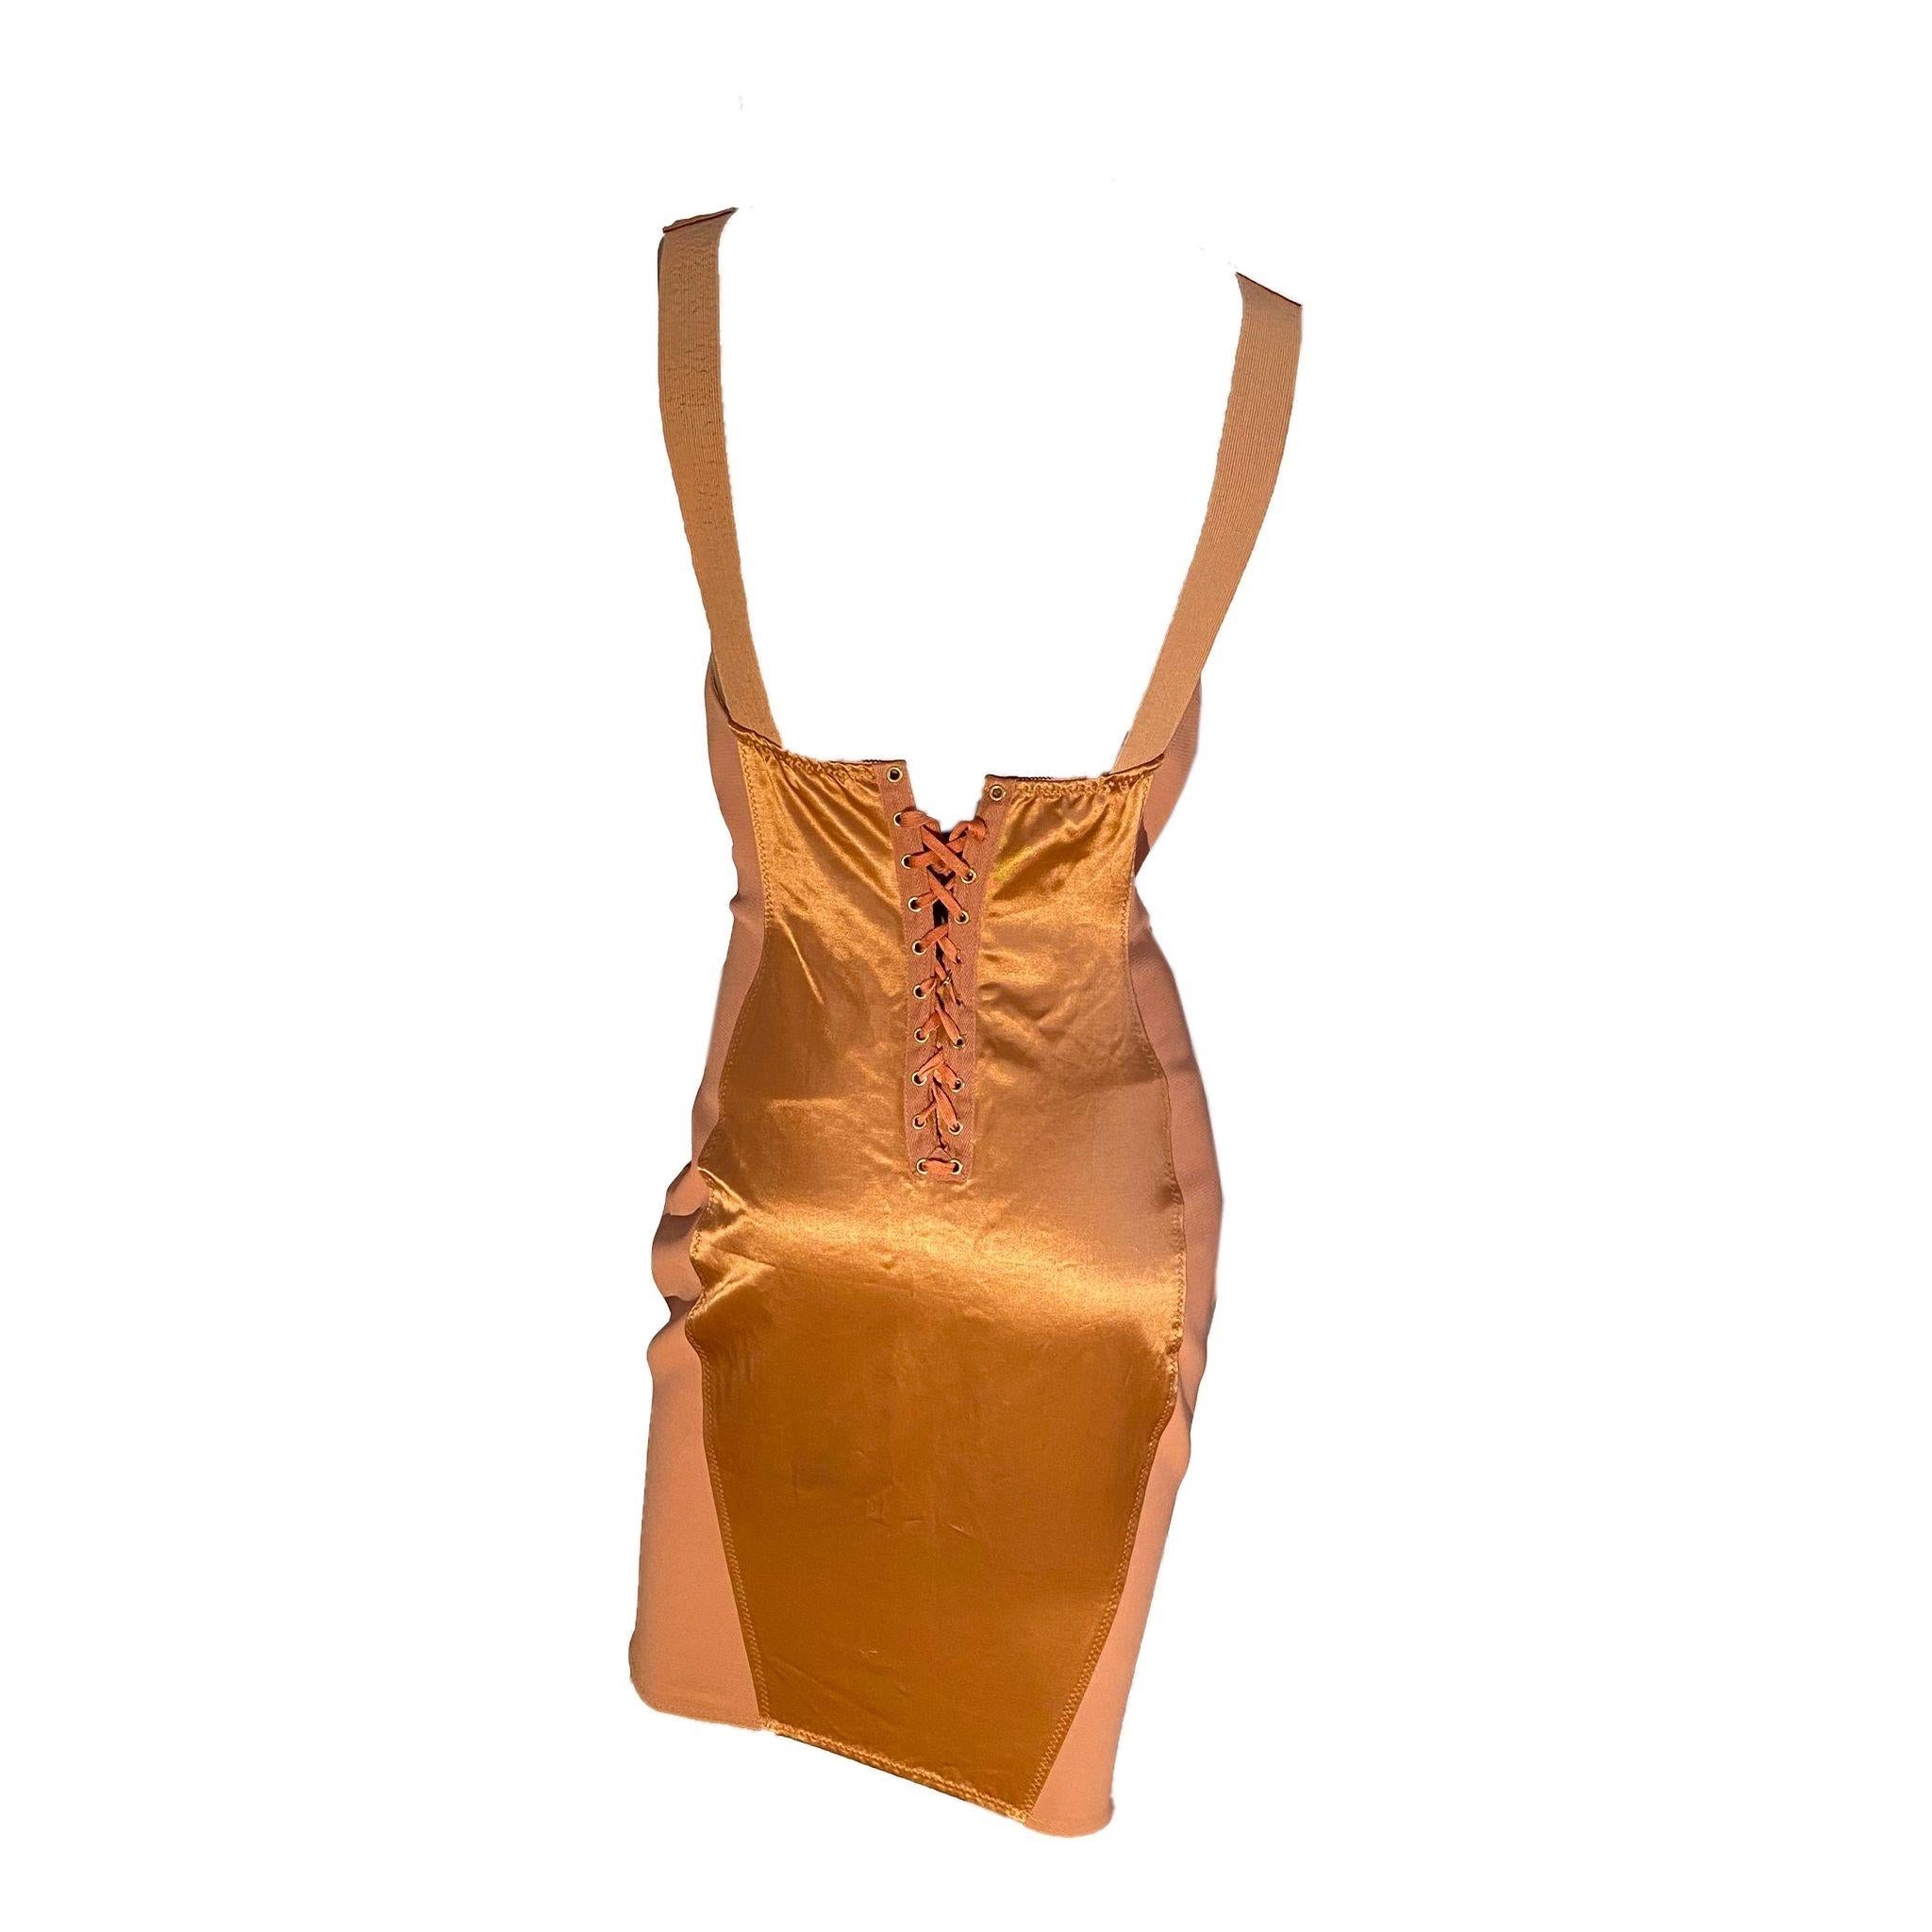 Jean Paul Gaultier 1989 Iconic “Cone Bust” Corset Dress

Jean Paul Gaultier Late 80s Junior Salmon Corset Dress with signature “Cone Bust”, popularized by Madonna. Front Zipper closure with Lace-Up Back system.

Left strap has some signs of